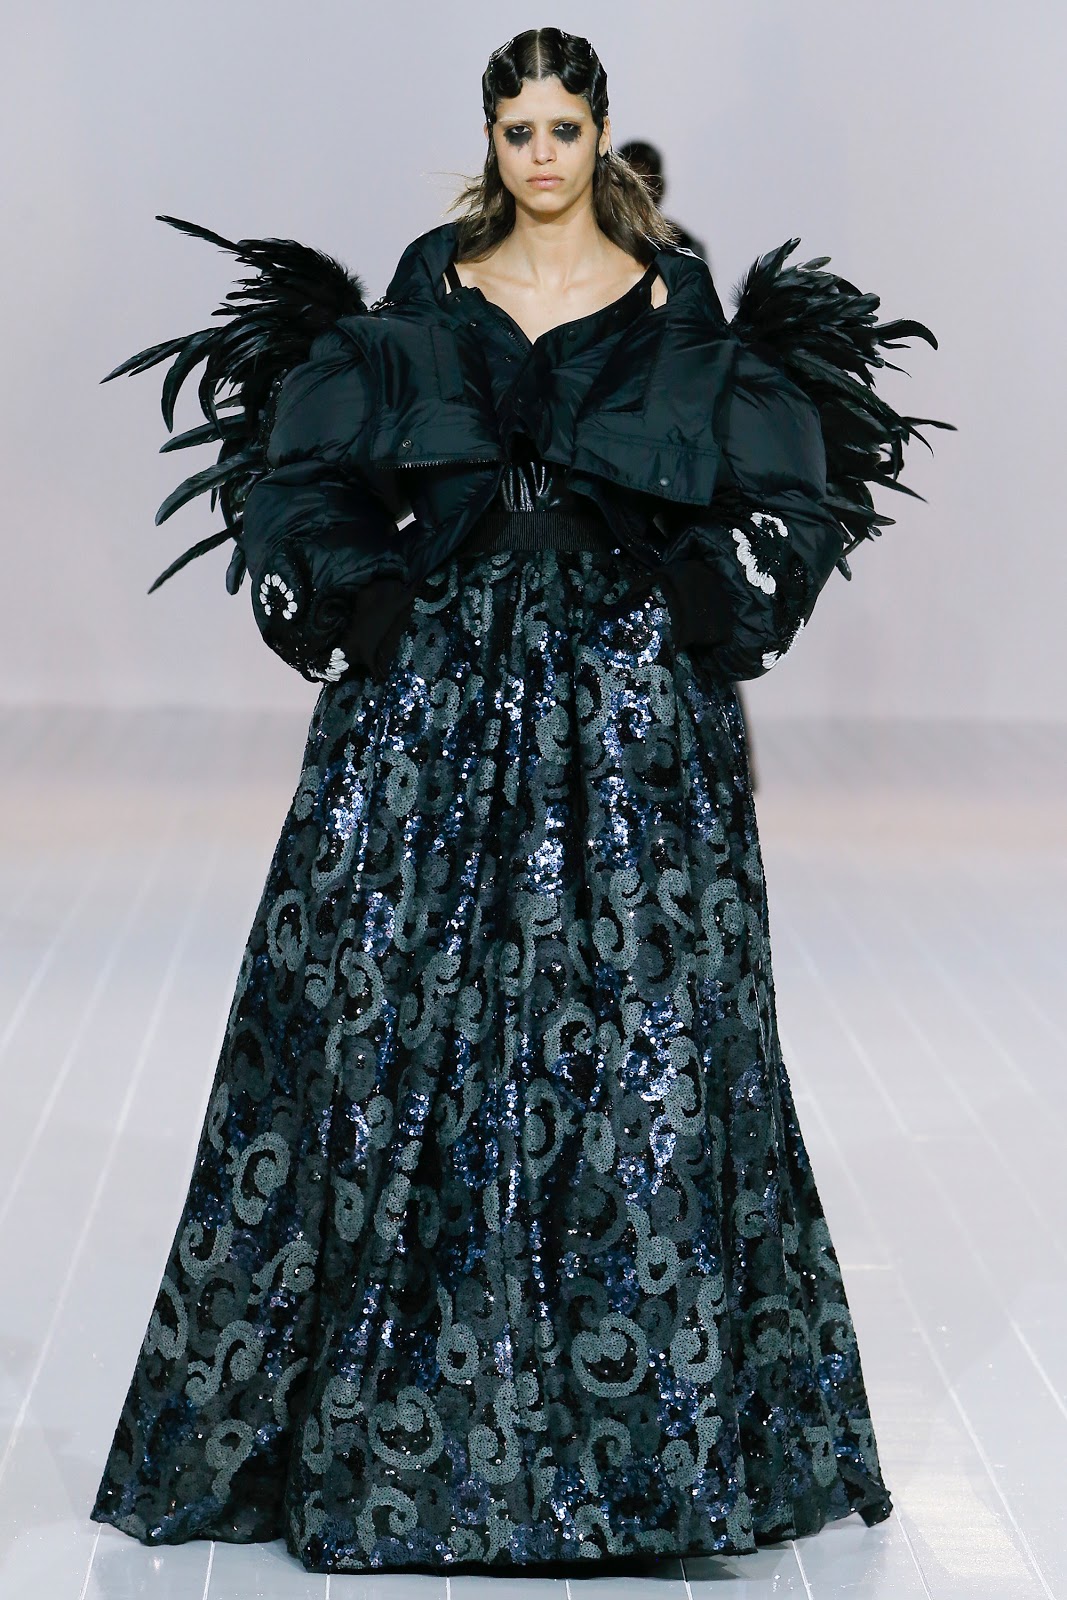 Fashion Runway | Marc Jacobs Fall 2016 : Glamorous and ...